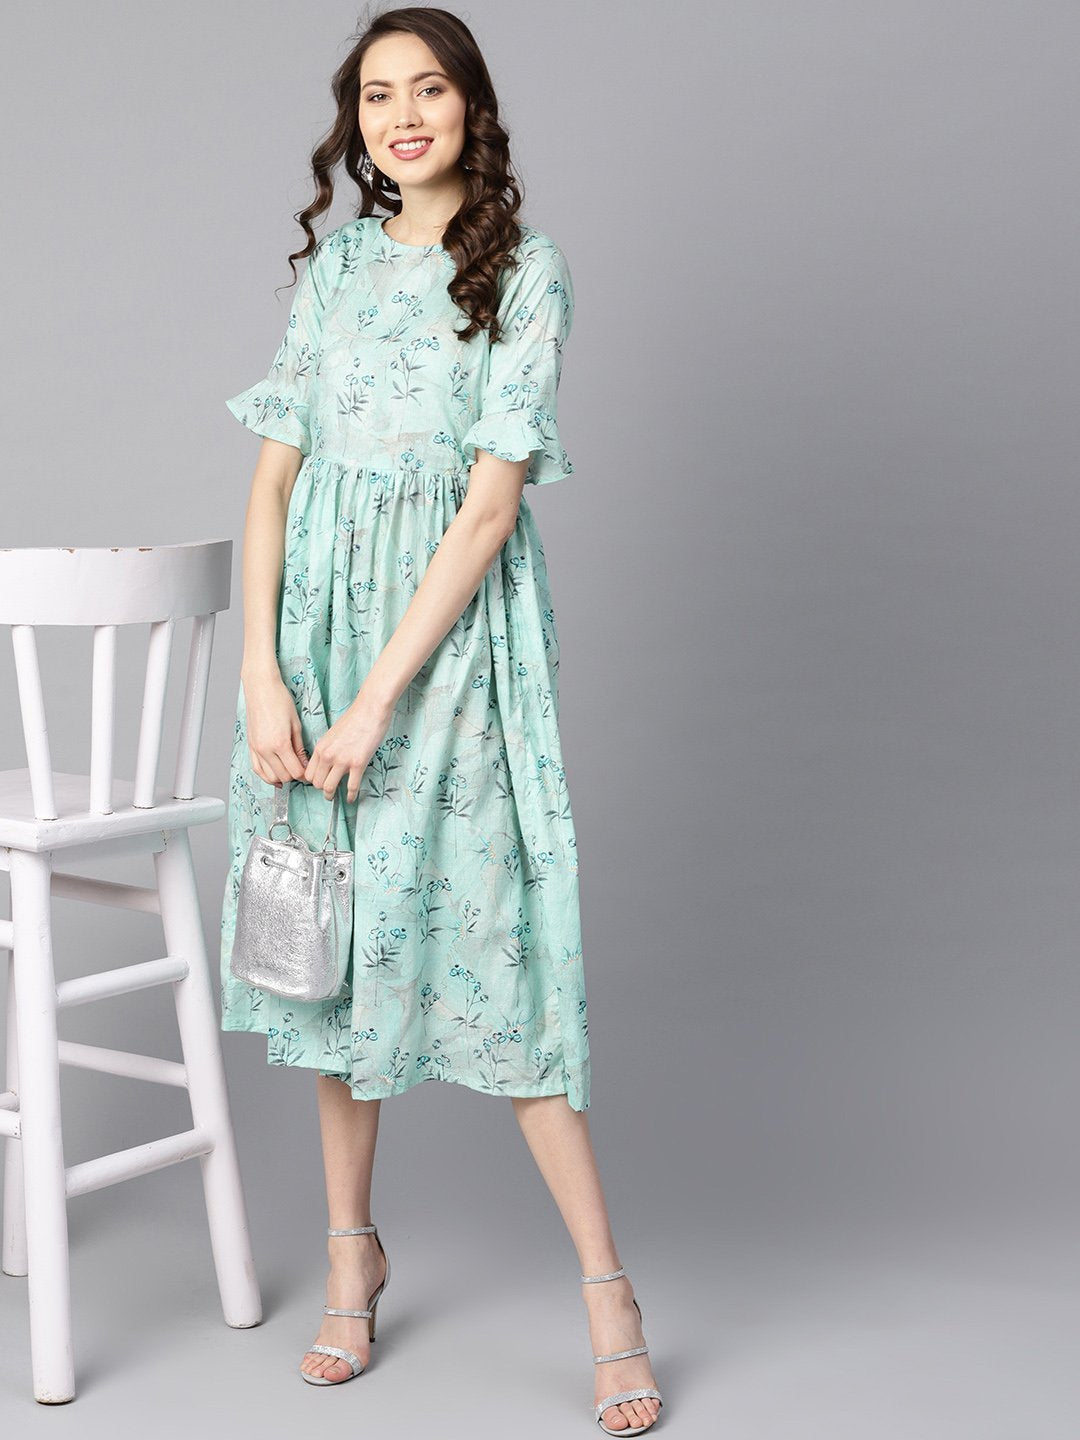 Women's Sky Blue Floral Printed Dress With Flared Sleeves - Nayo Clothing